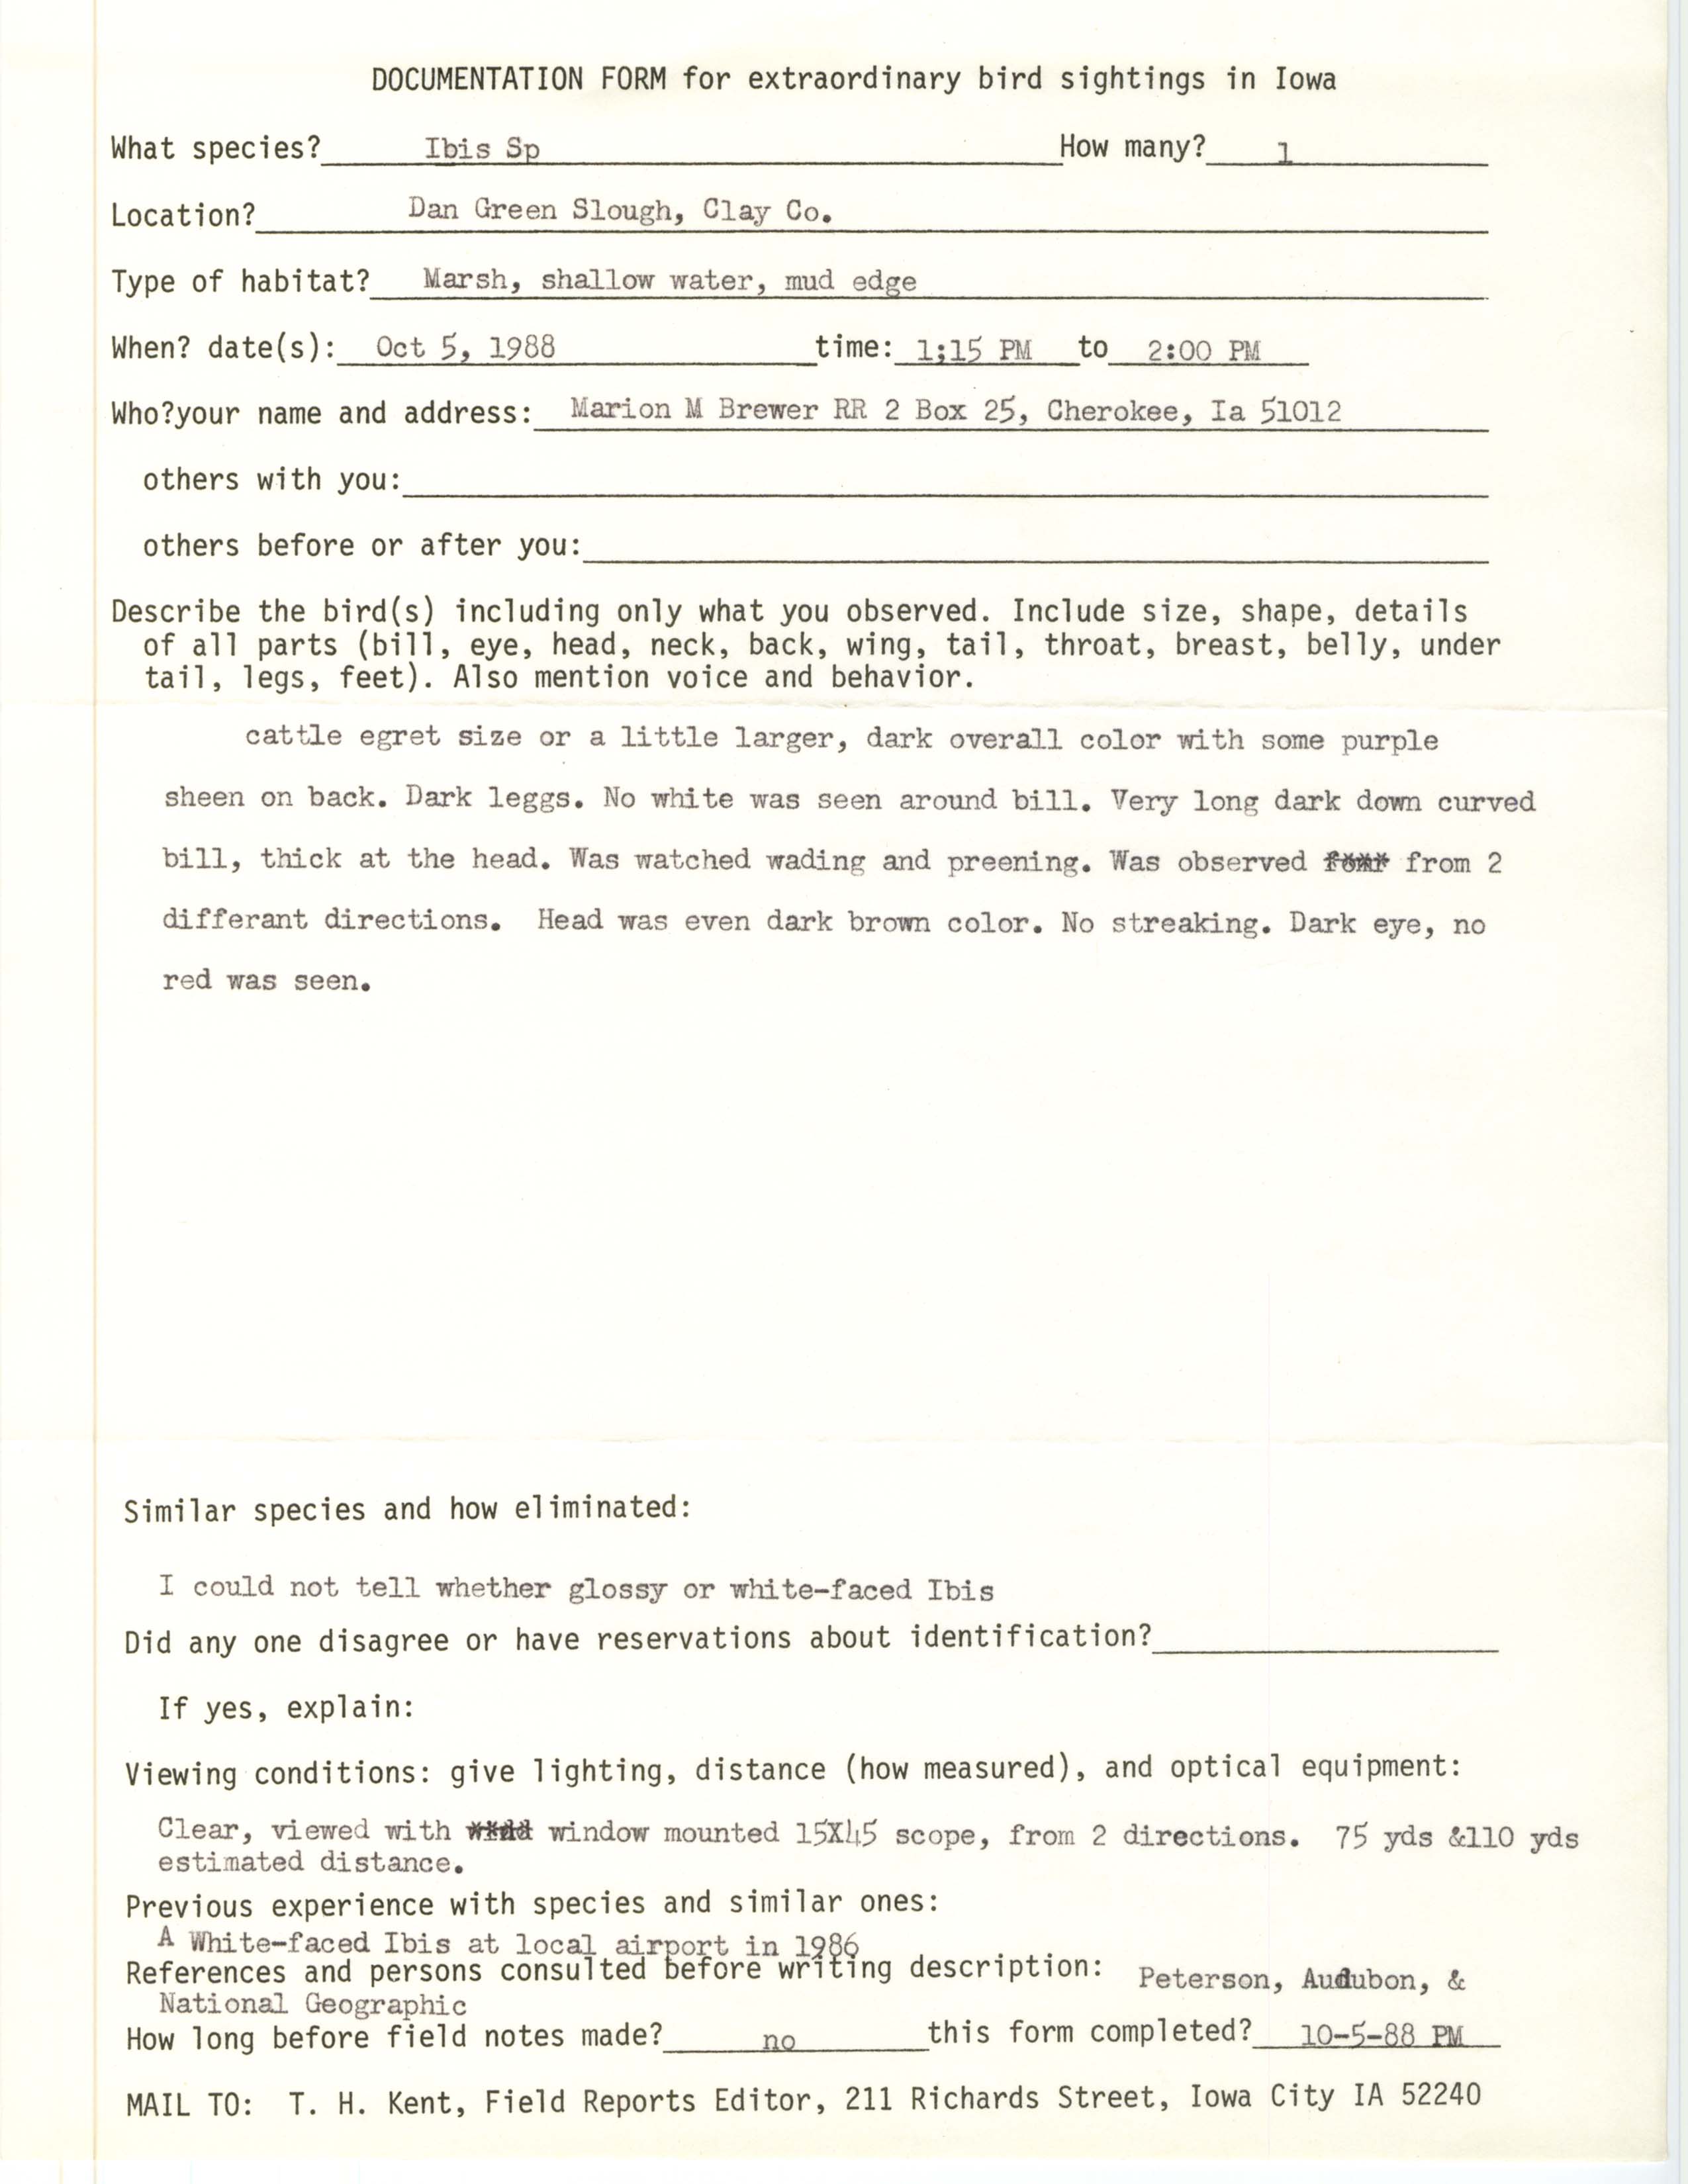 Rare bird documentation form for Ibis species at Dan Green Slough at Clay County, 1988